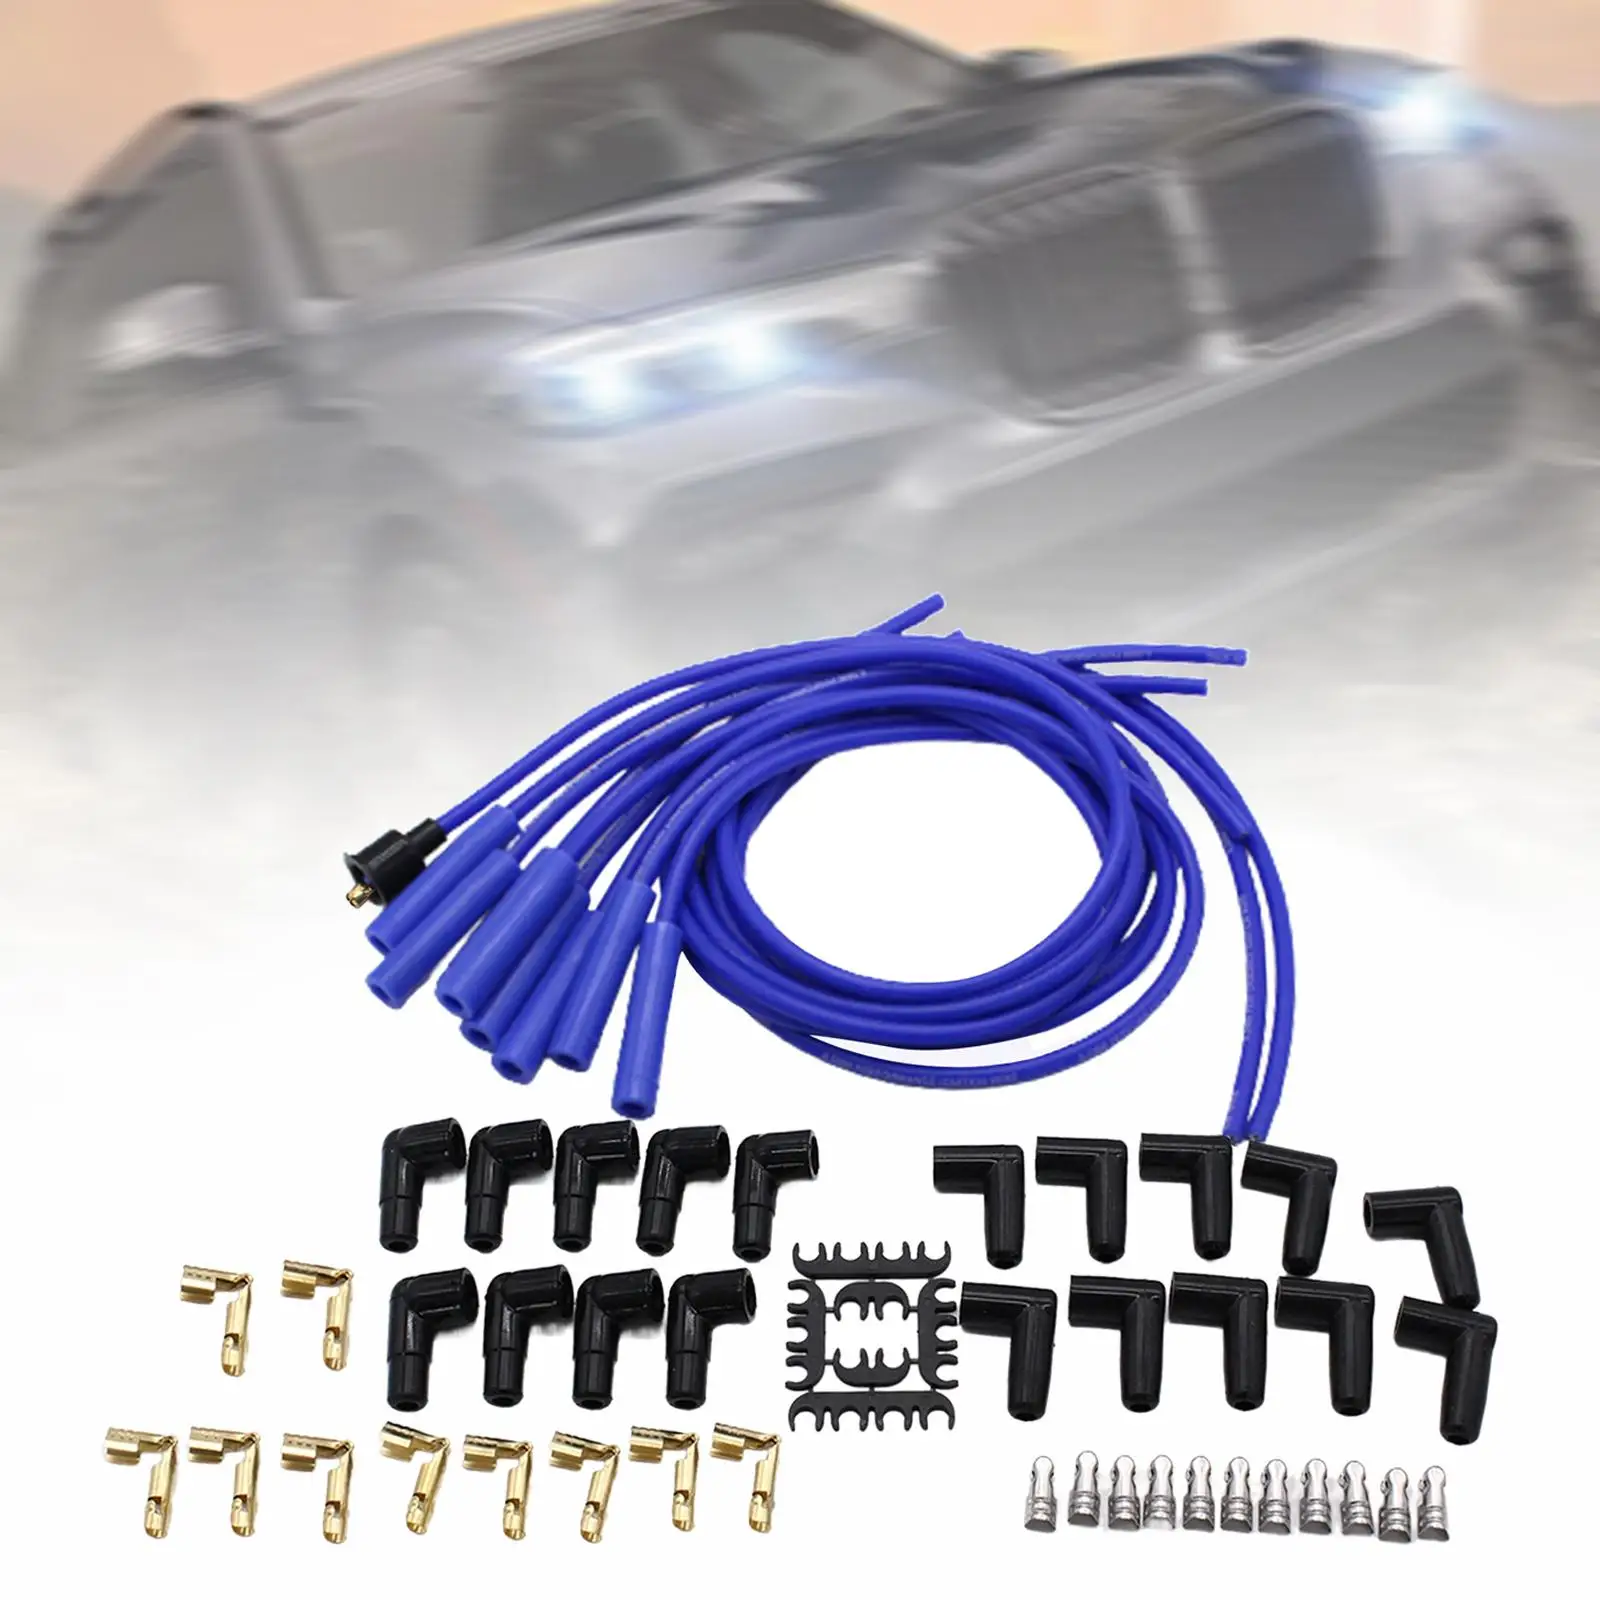 Universal 8mm Ignition Wire Set 180 Degree Boots Spark Plug Wire Car Accessories Spare Parts Direct Mount Reliable